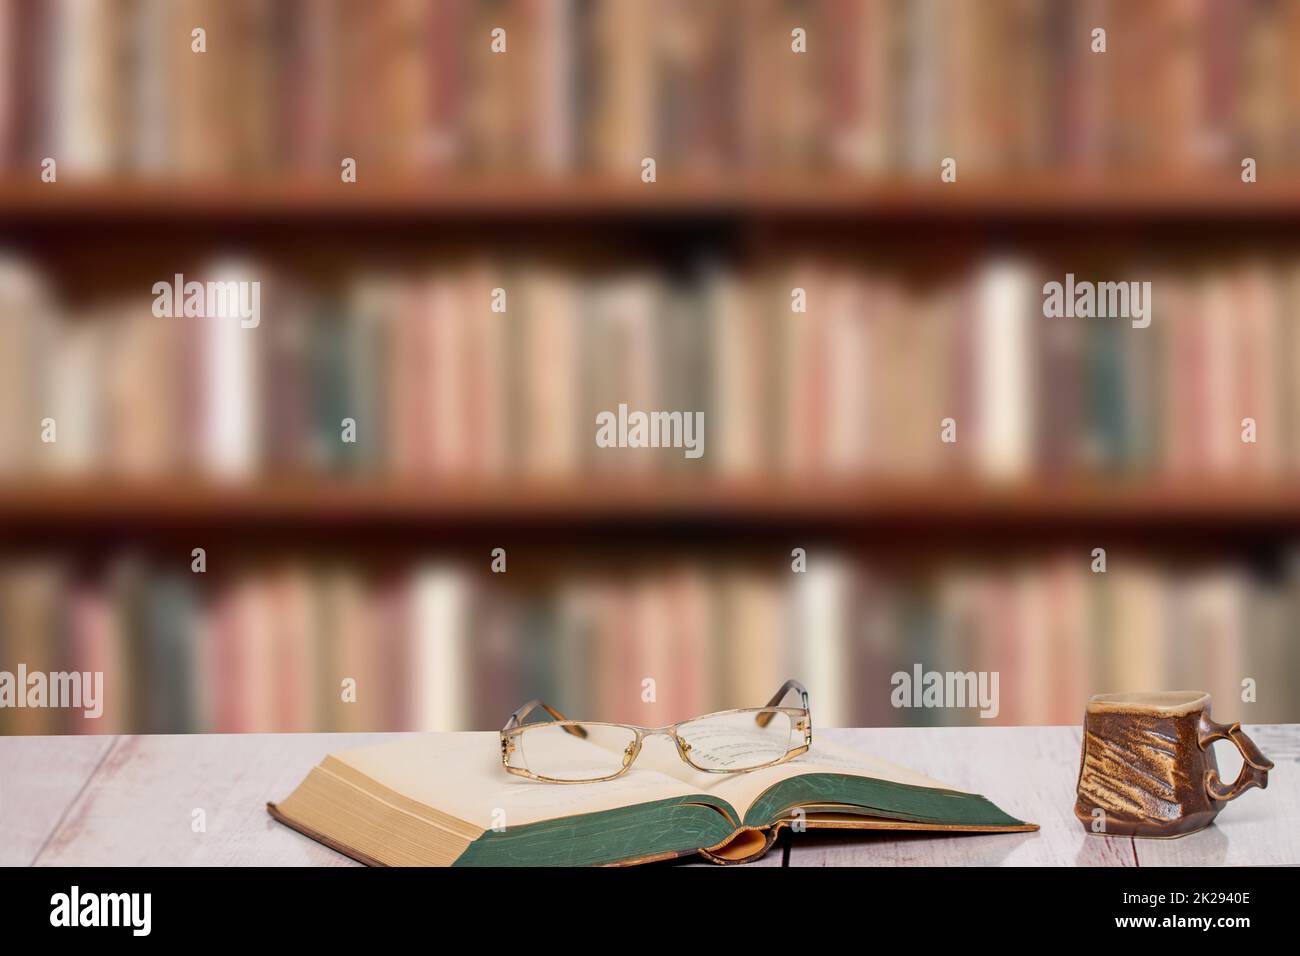 Books backgrounds. Closeup of an antique book with reading glasses on it and a brown clay mug on a light pink desk over a blurred bookshelf in library. Education concept. Teachers day. Stock Photo